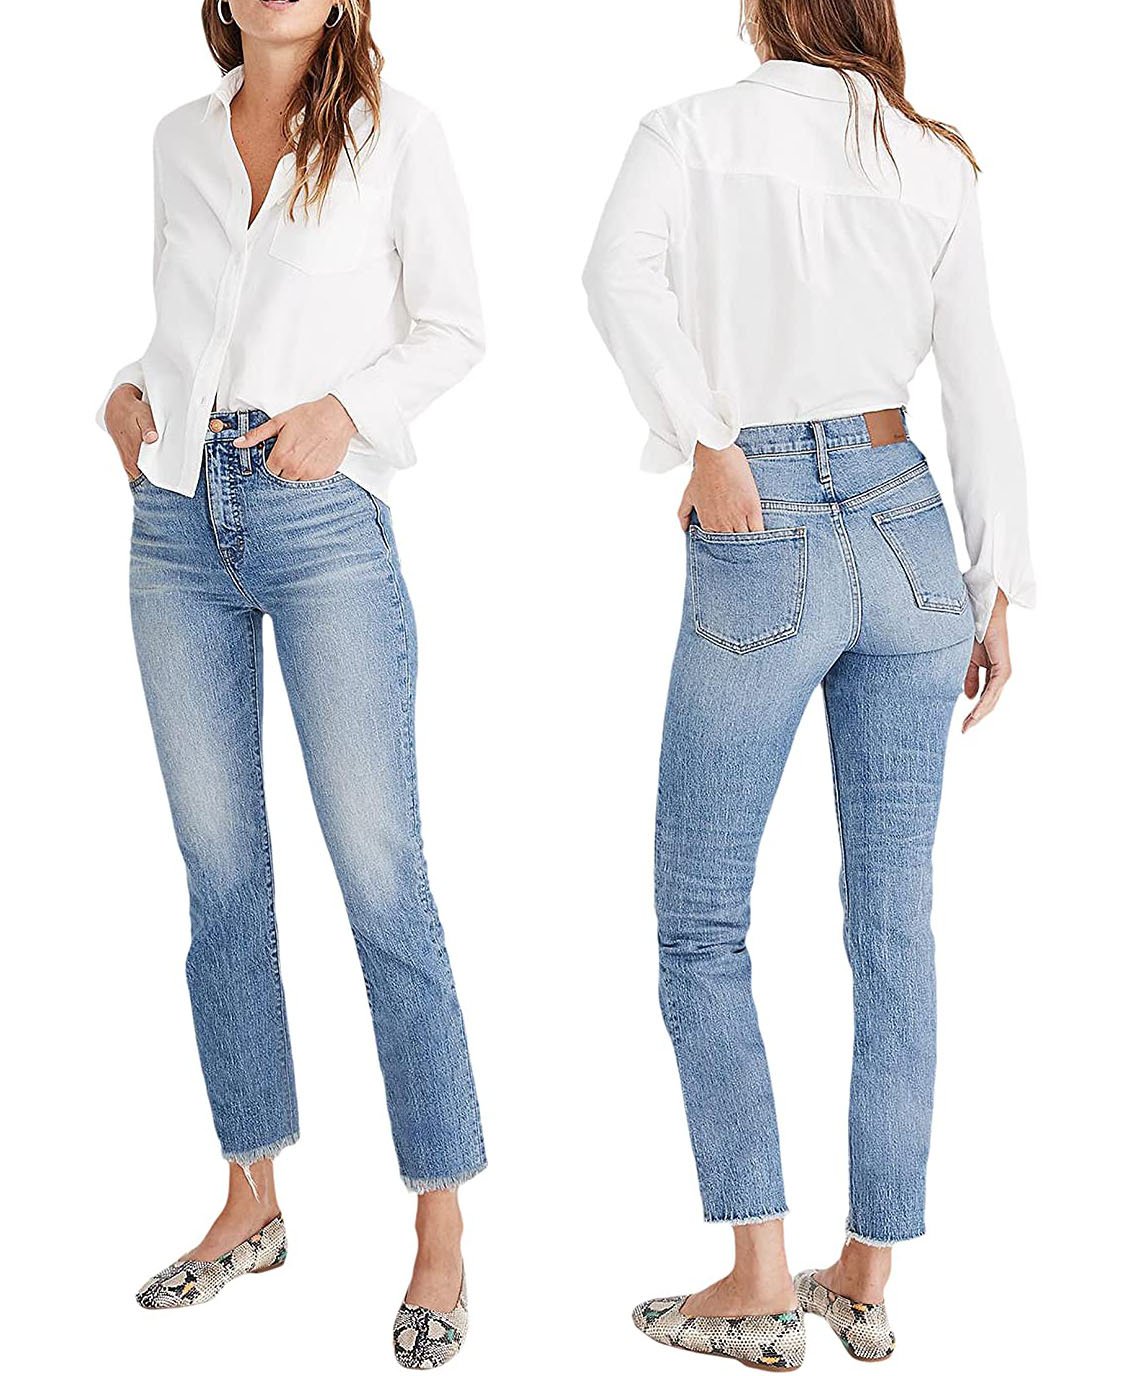 With a waist-accentuating fit and tapered legs, these Perfect Vintage jeans are a classic pair of '90s mom jeans